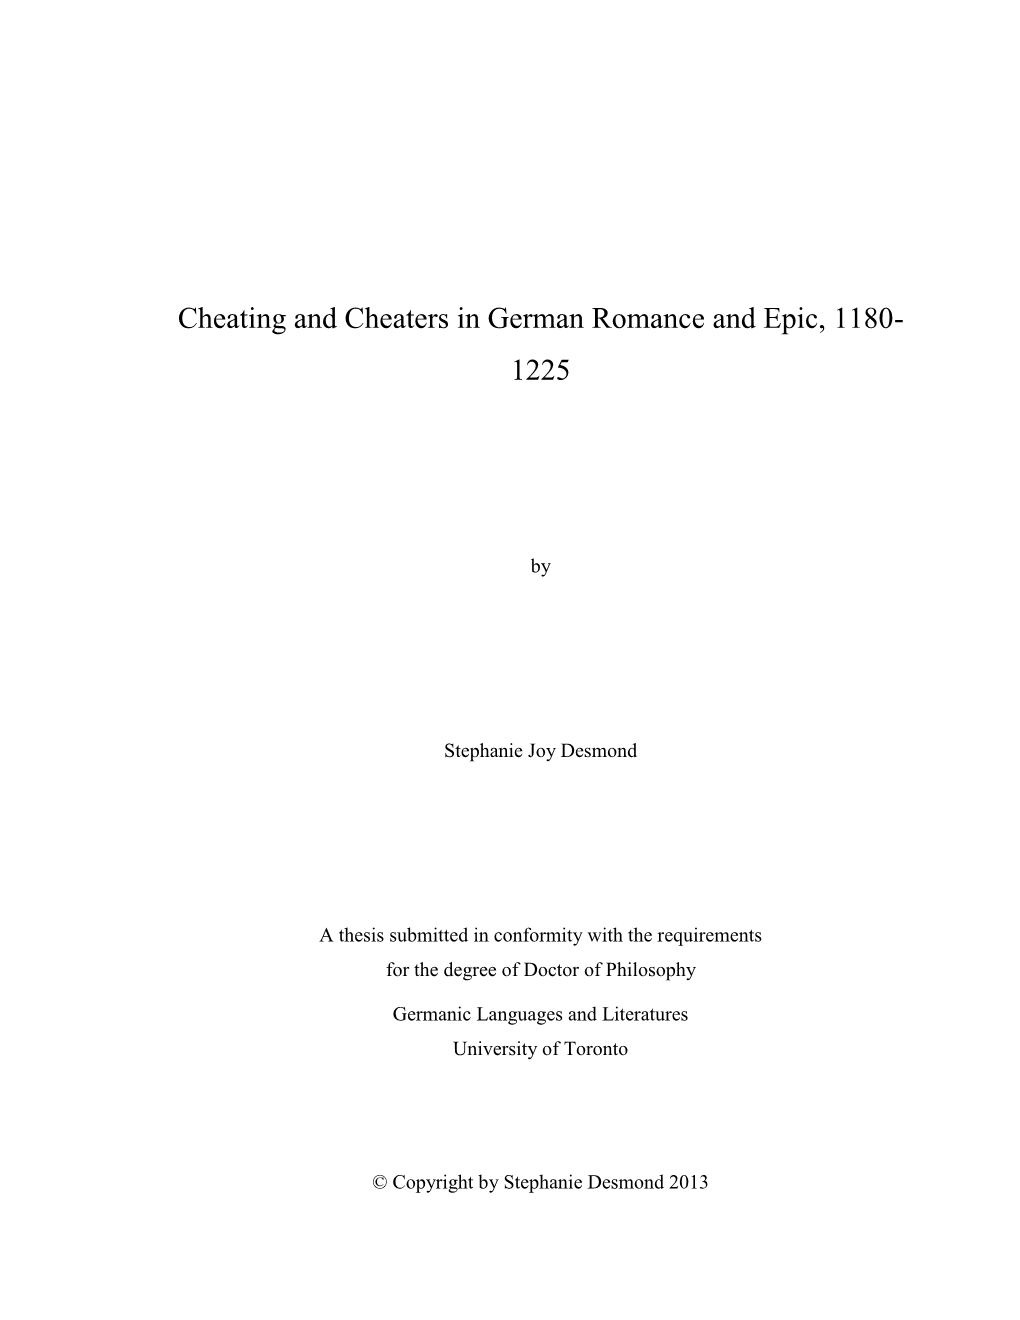 Cheating and Cheaters in German Romance and Epic, 1180-1225